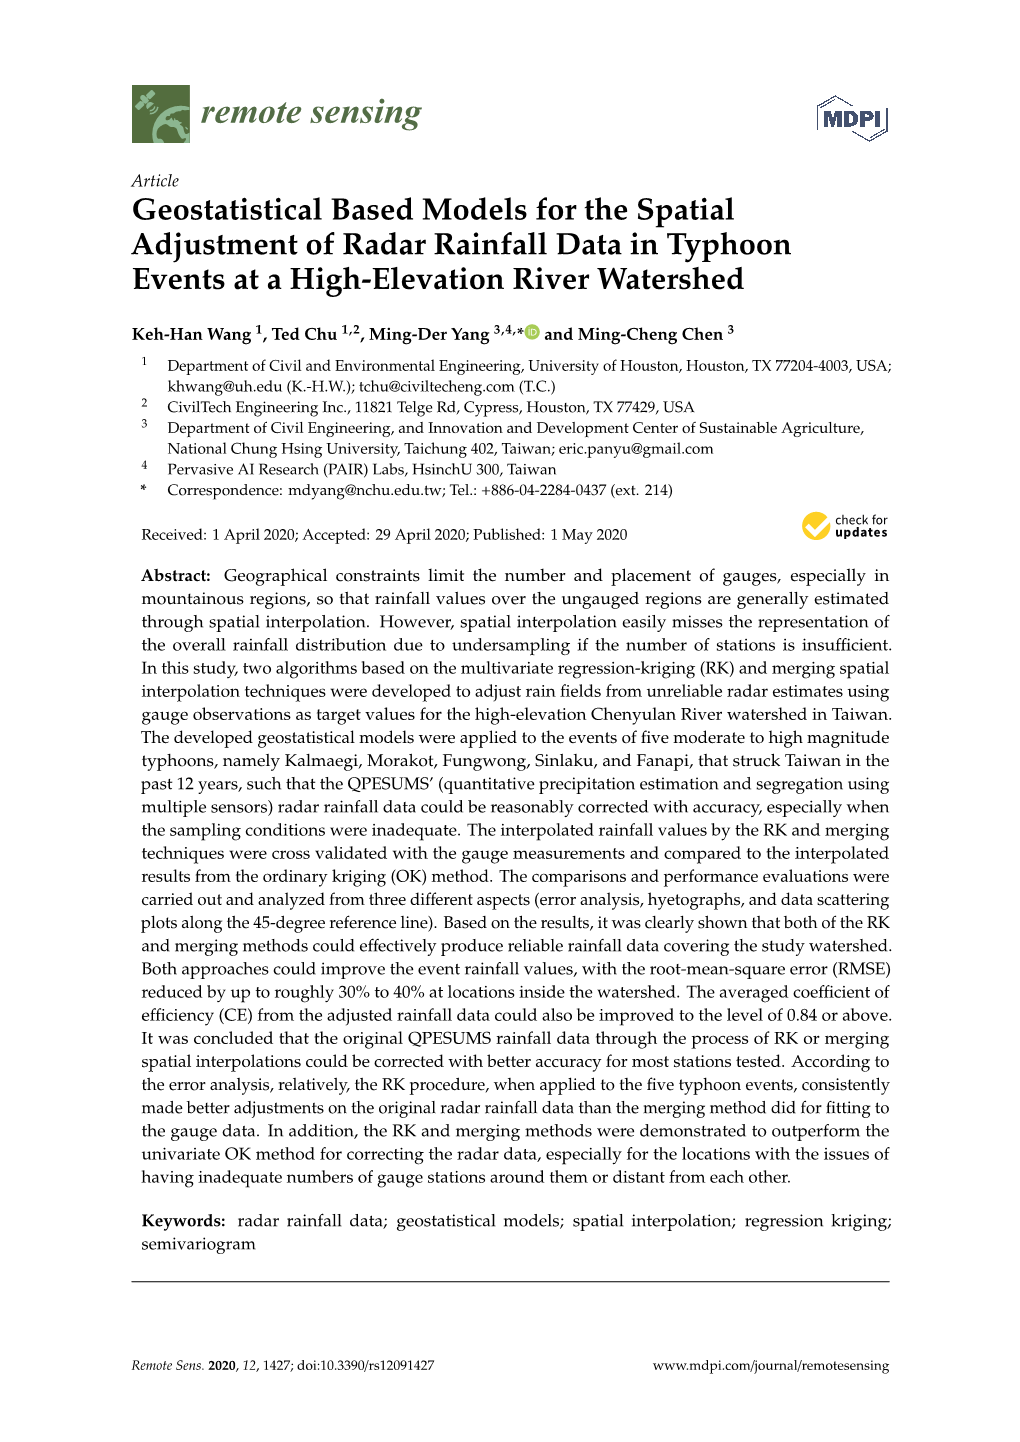 Geostatistical Based Models for the Spatial Adjustment of Radar Rainfall Data in Typhoon Events at a High-Elevation River Watershed